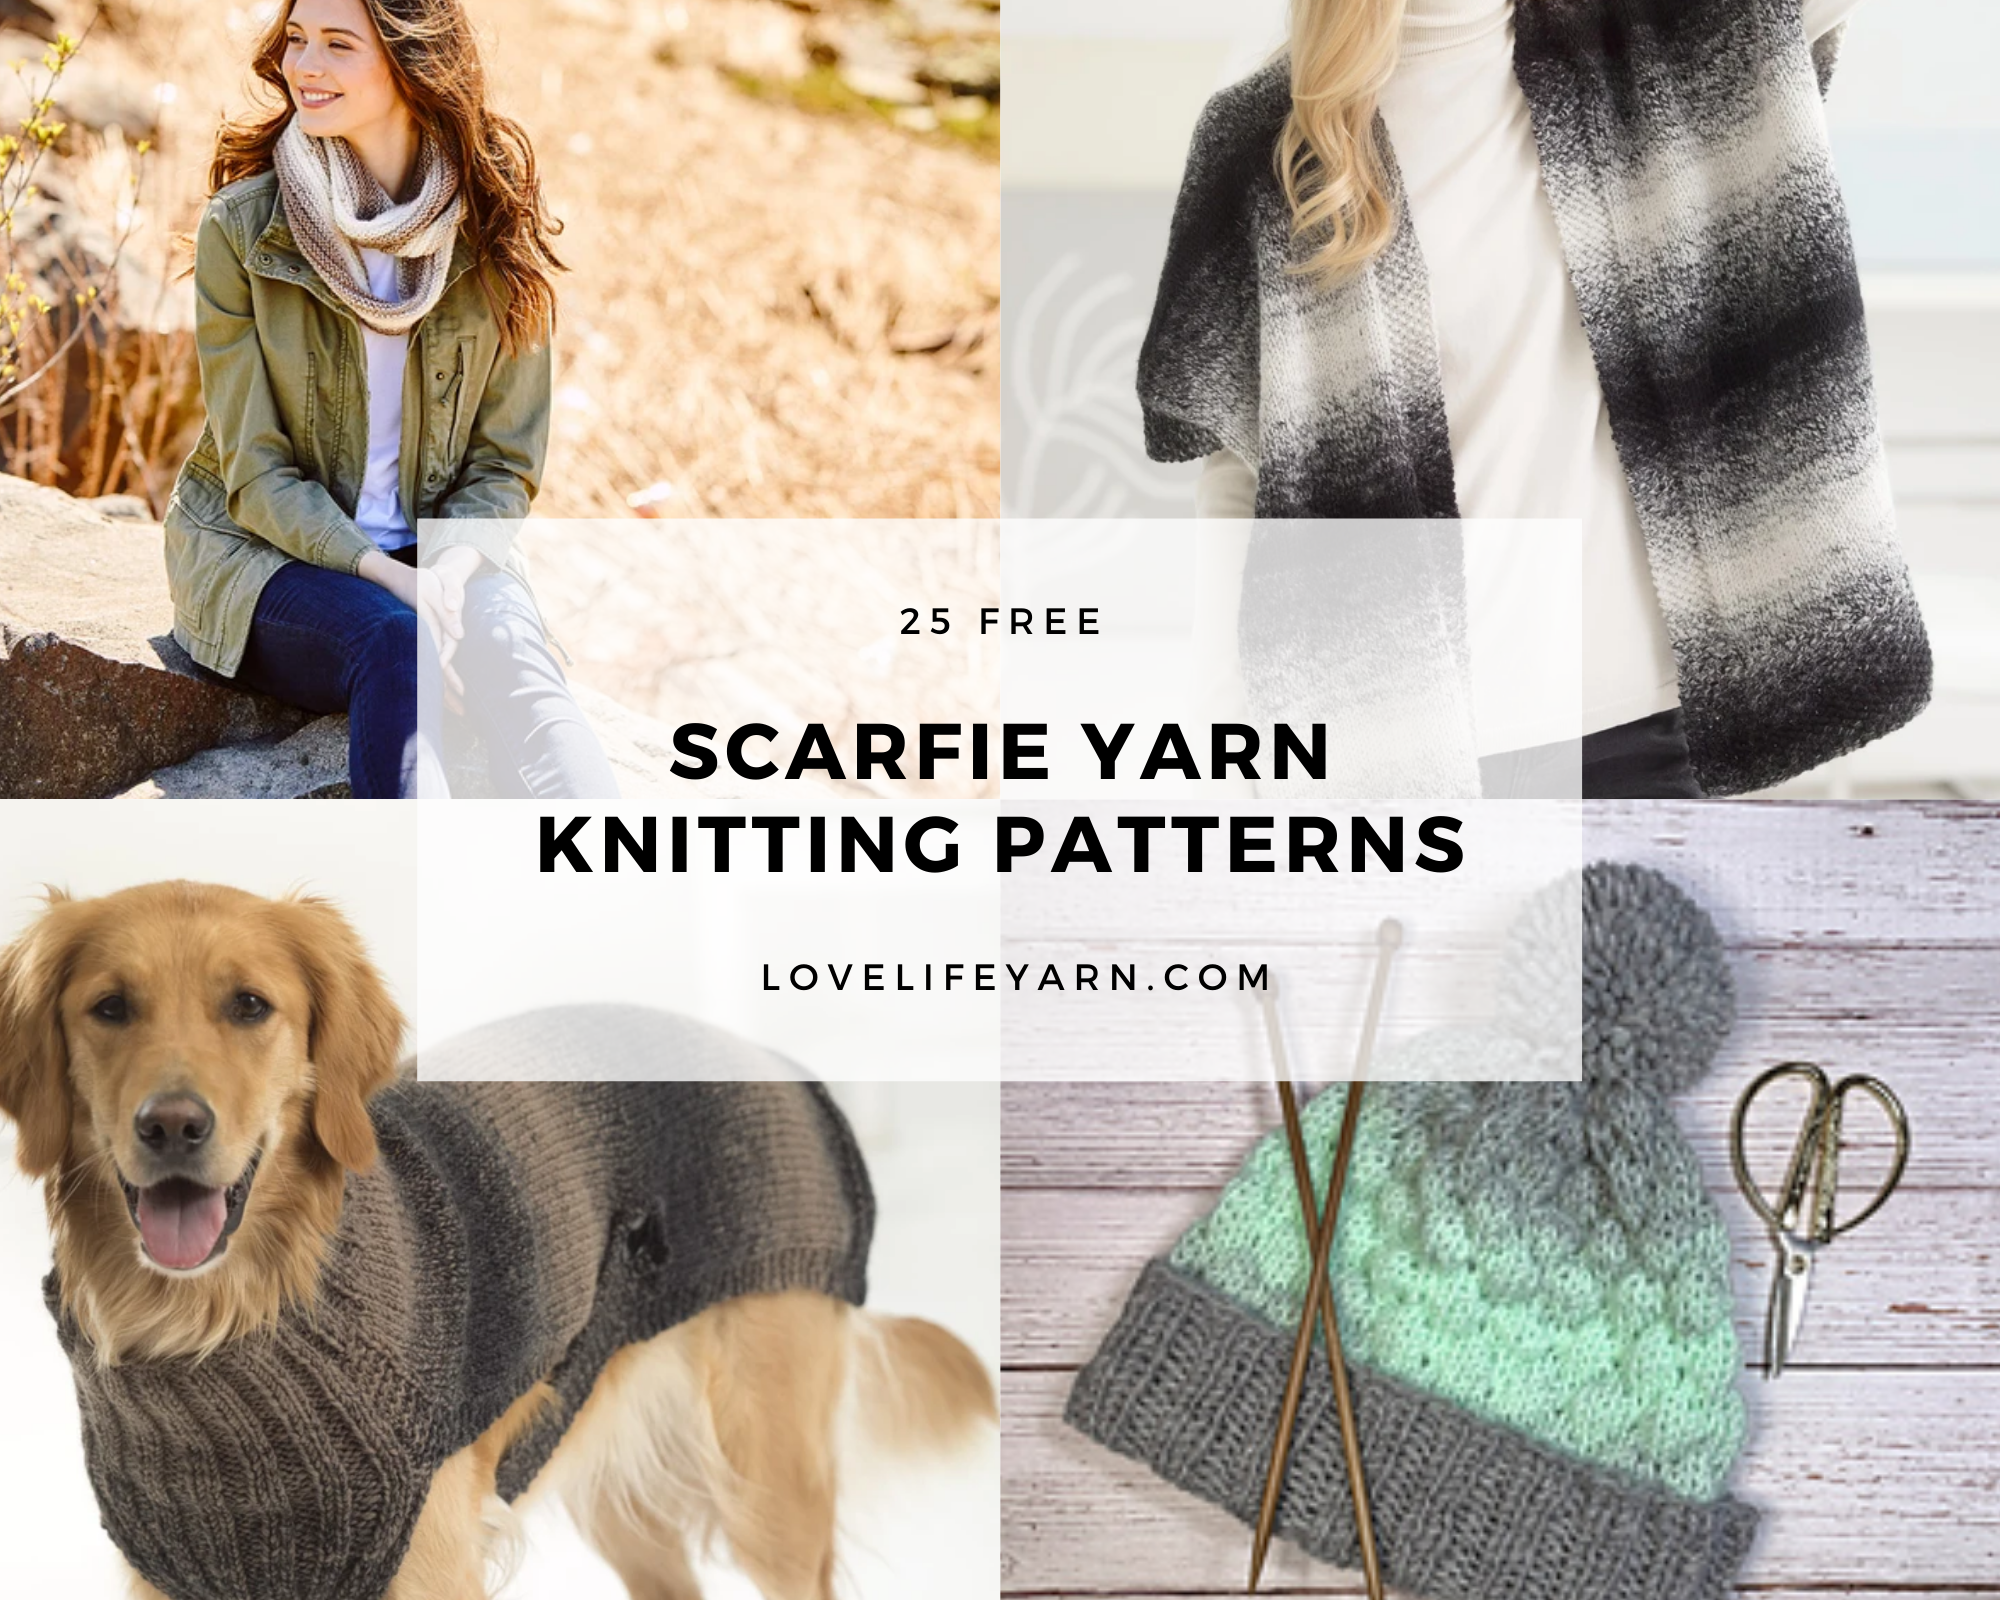 8 Designs to Make in Scarfie Yarn